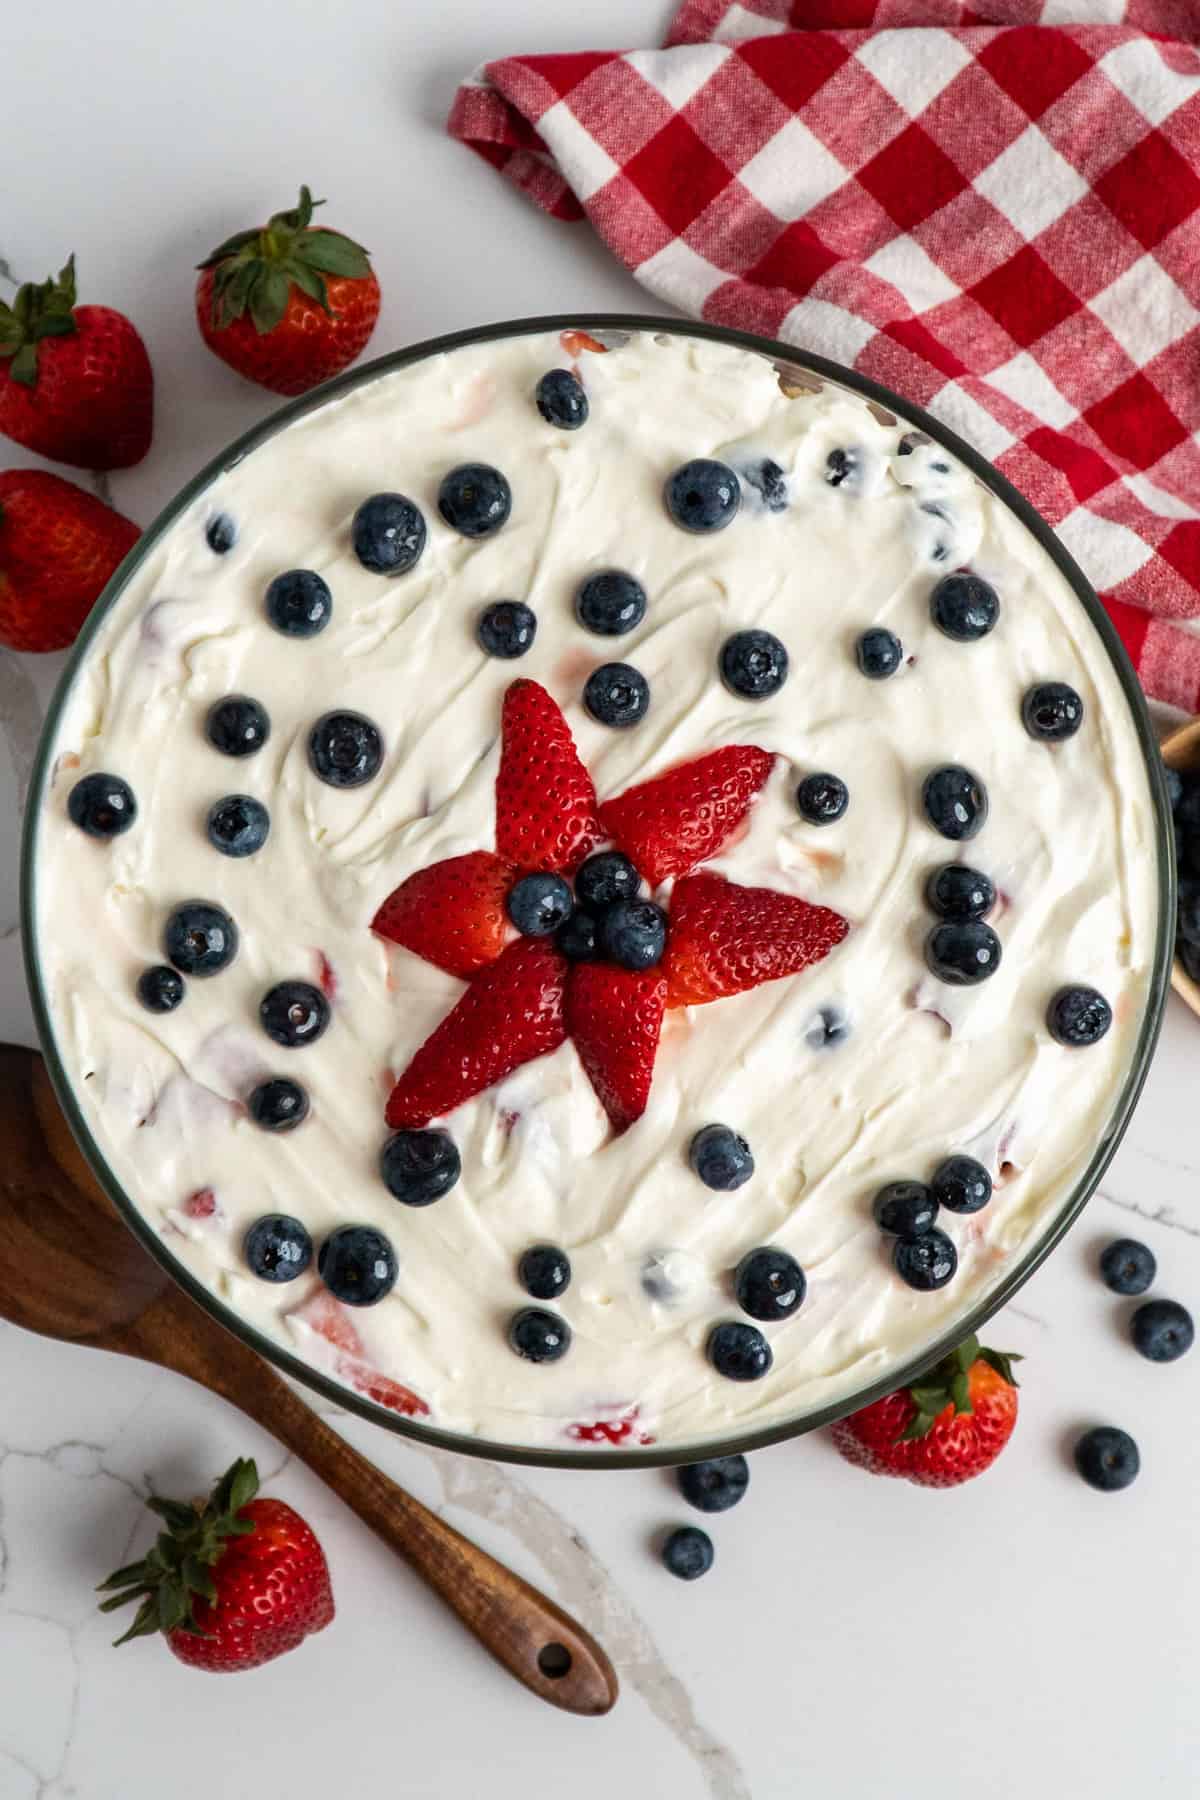 Overhead, look at a dessert with cream cheese frosting and berries on top.